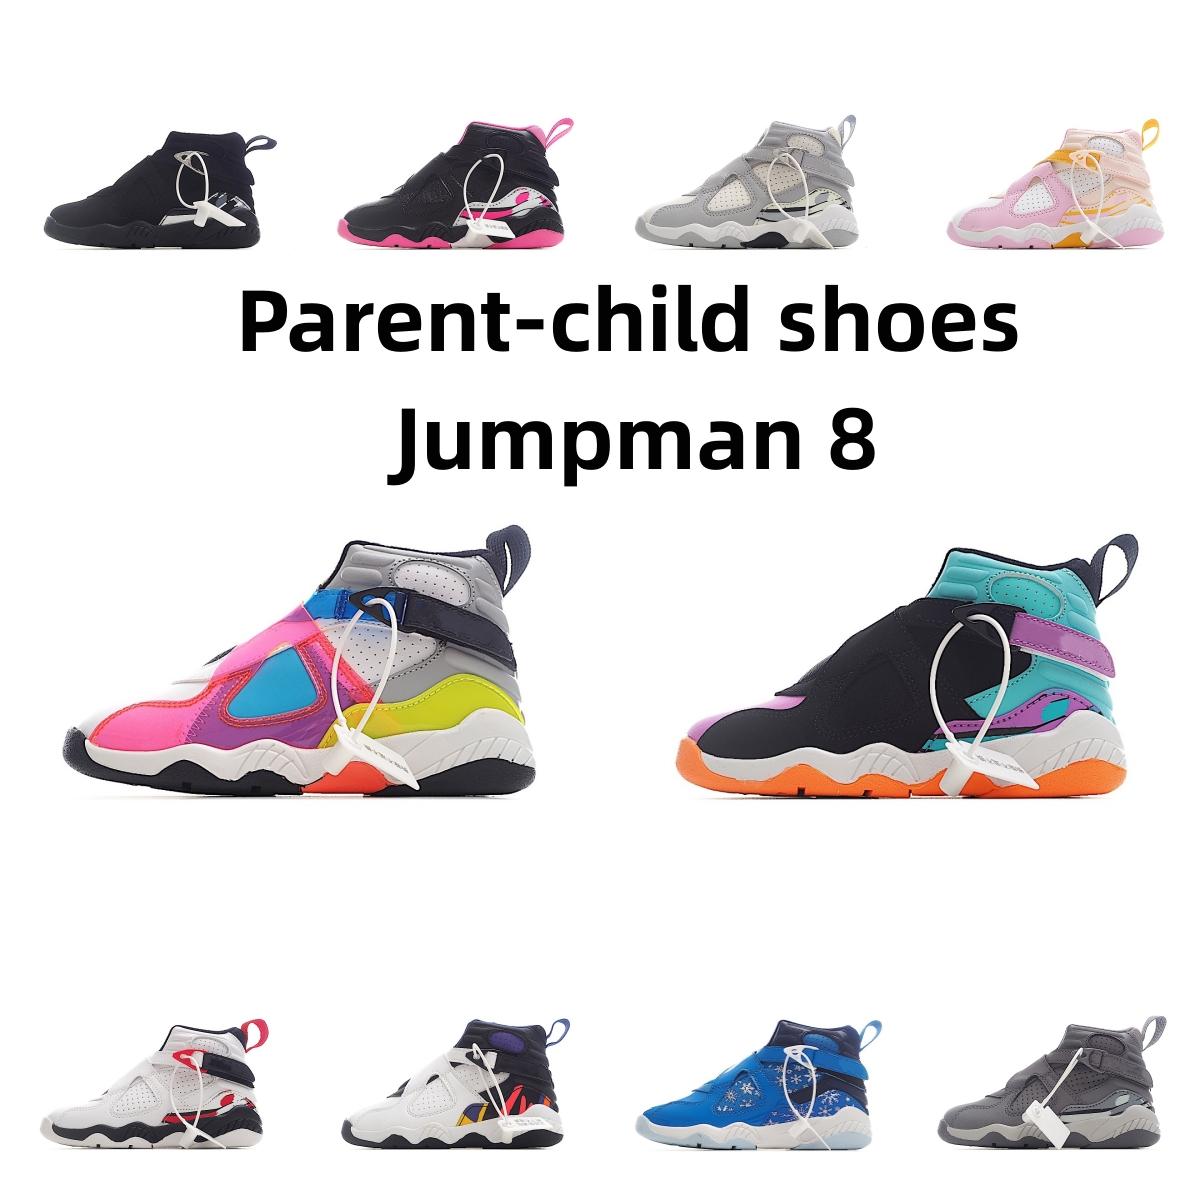 Jumpman 8 Kid Basketball Shoes Grape 8s Boys and Girls Designer Designer Trainers Trainers Conteakers